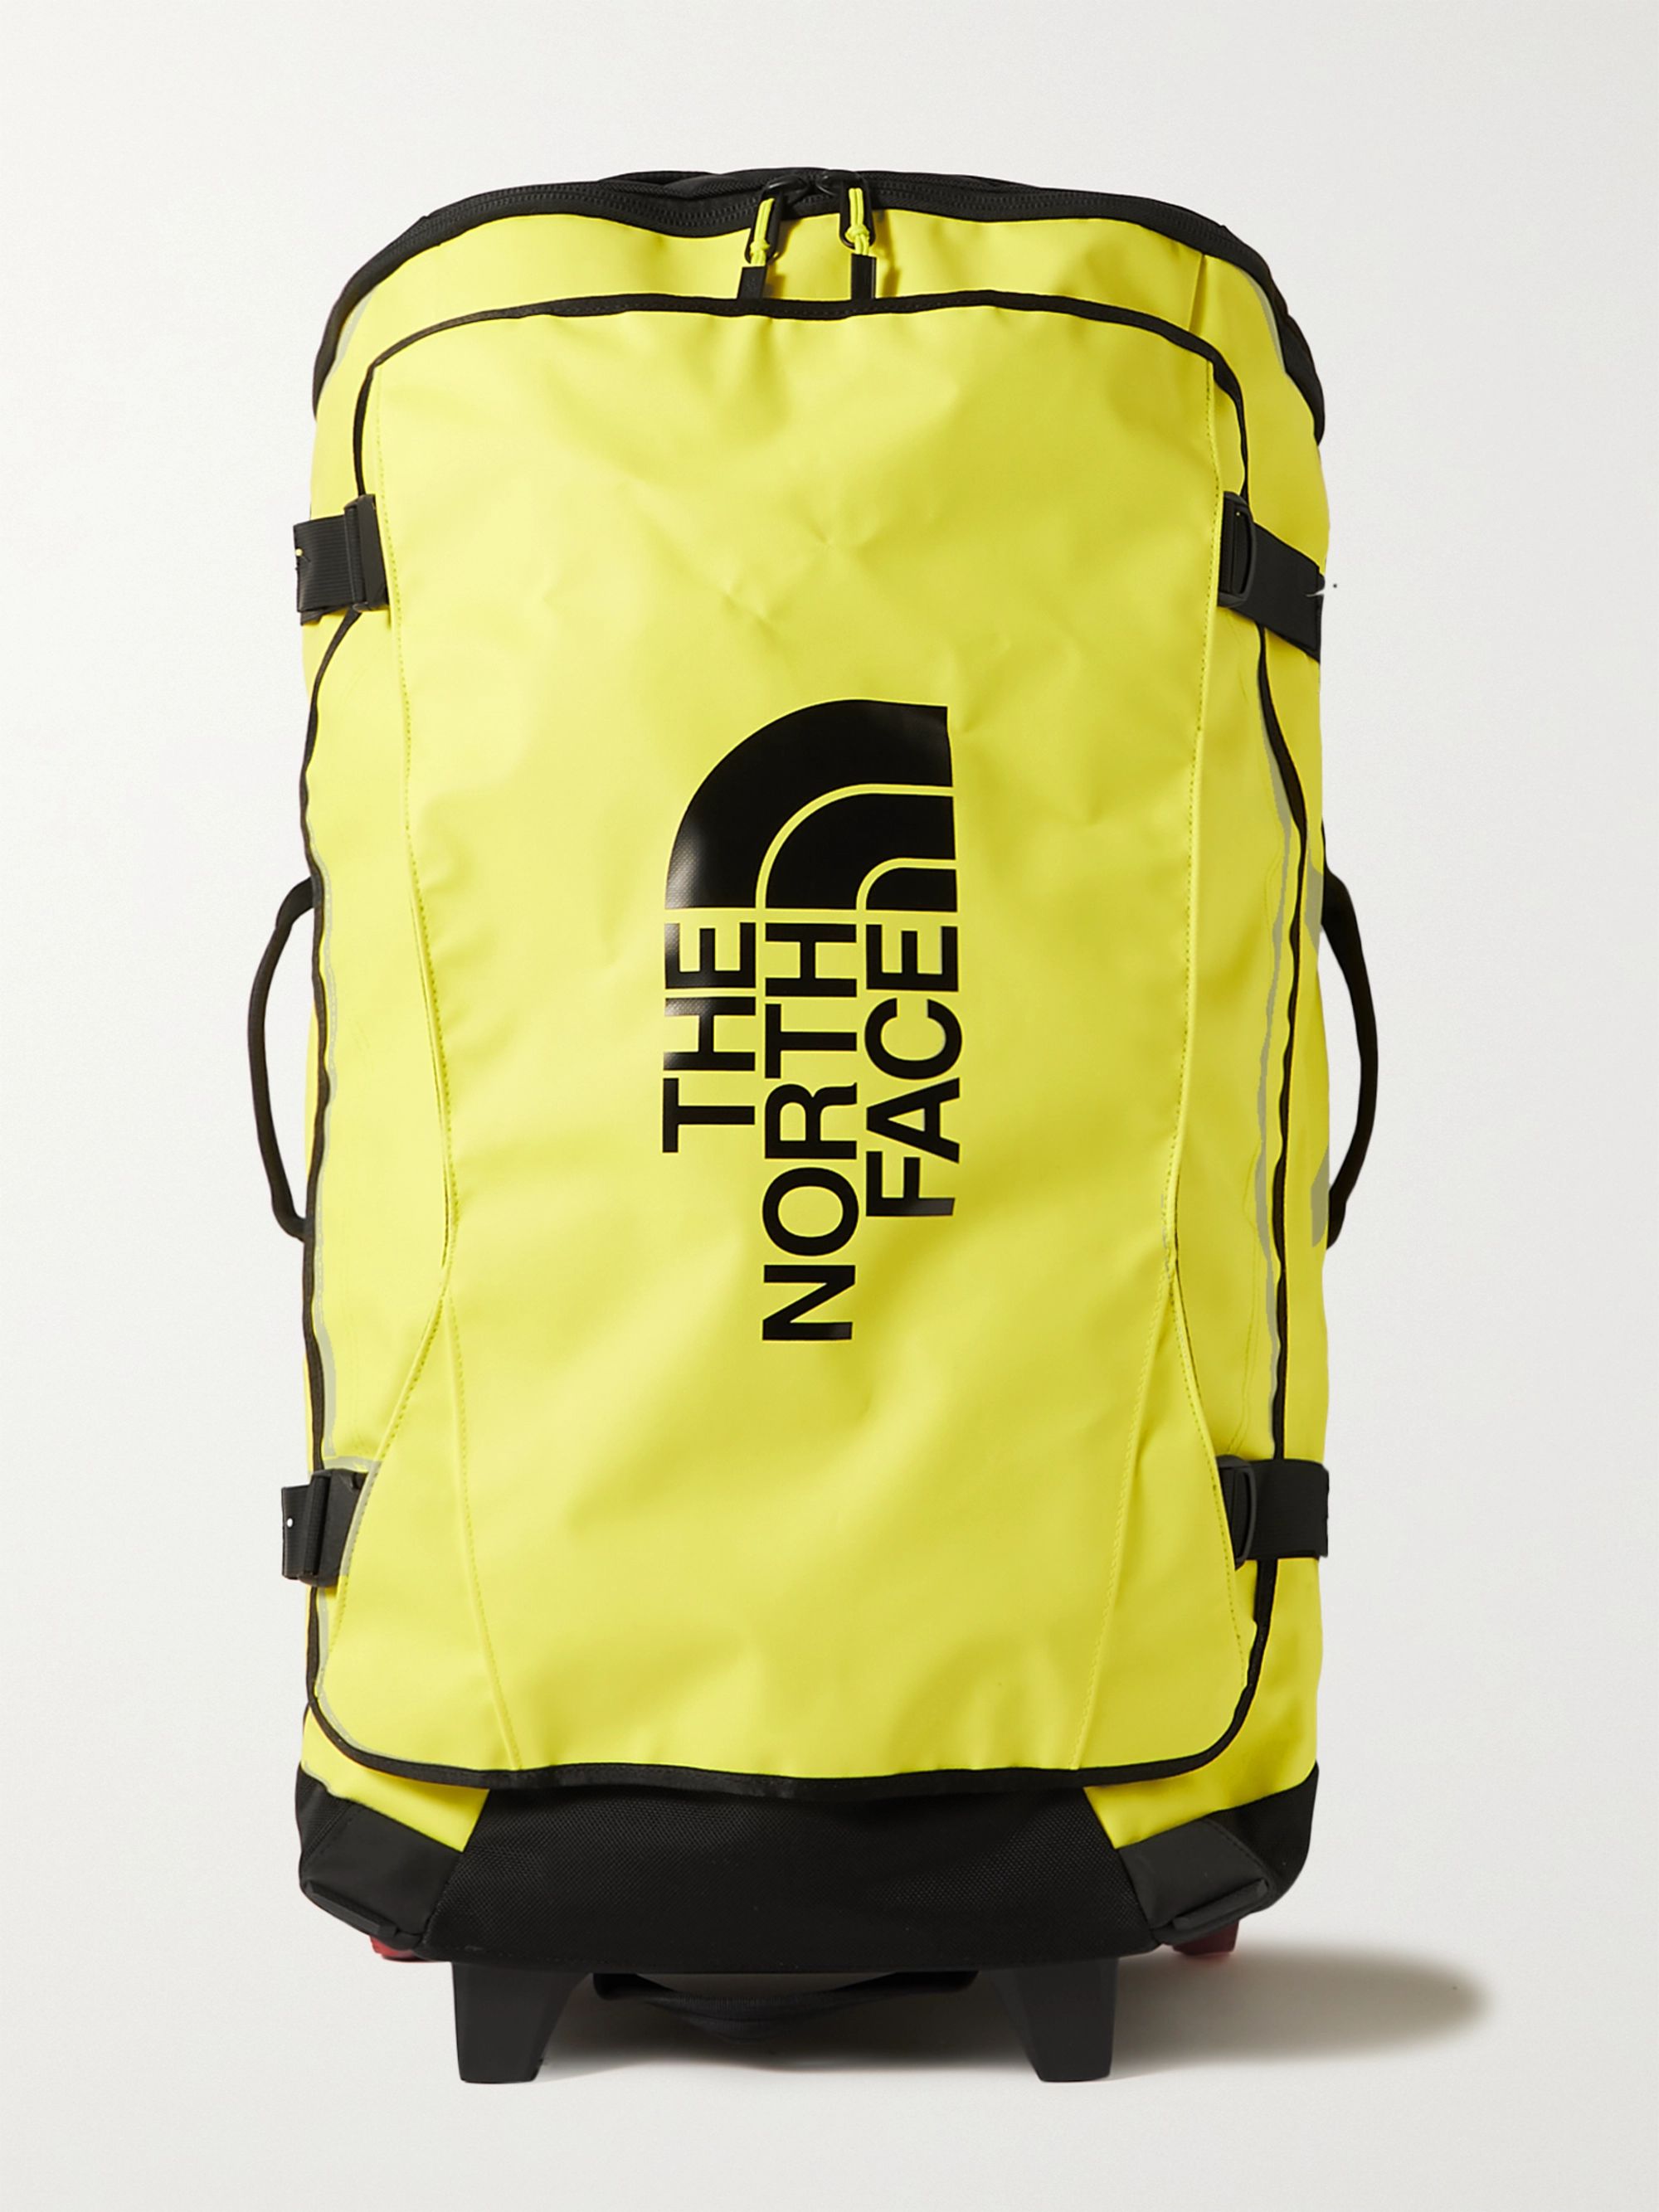 north face dry bag backpack